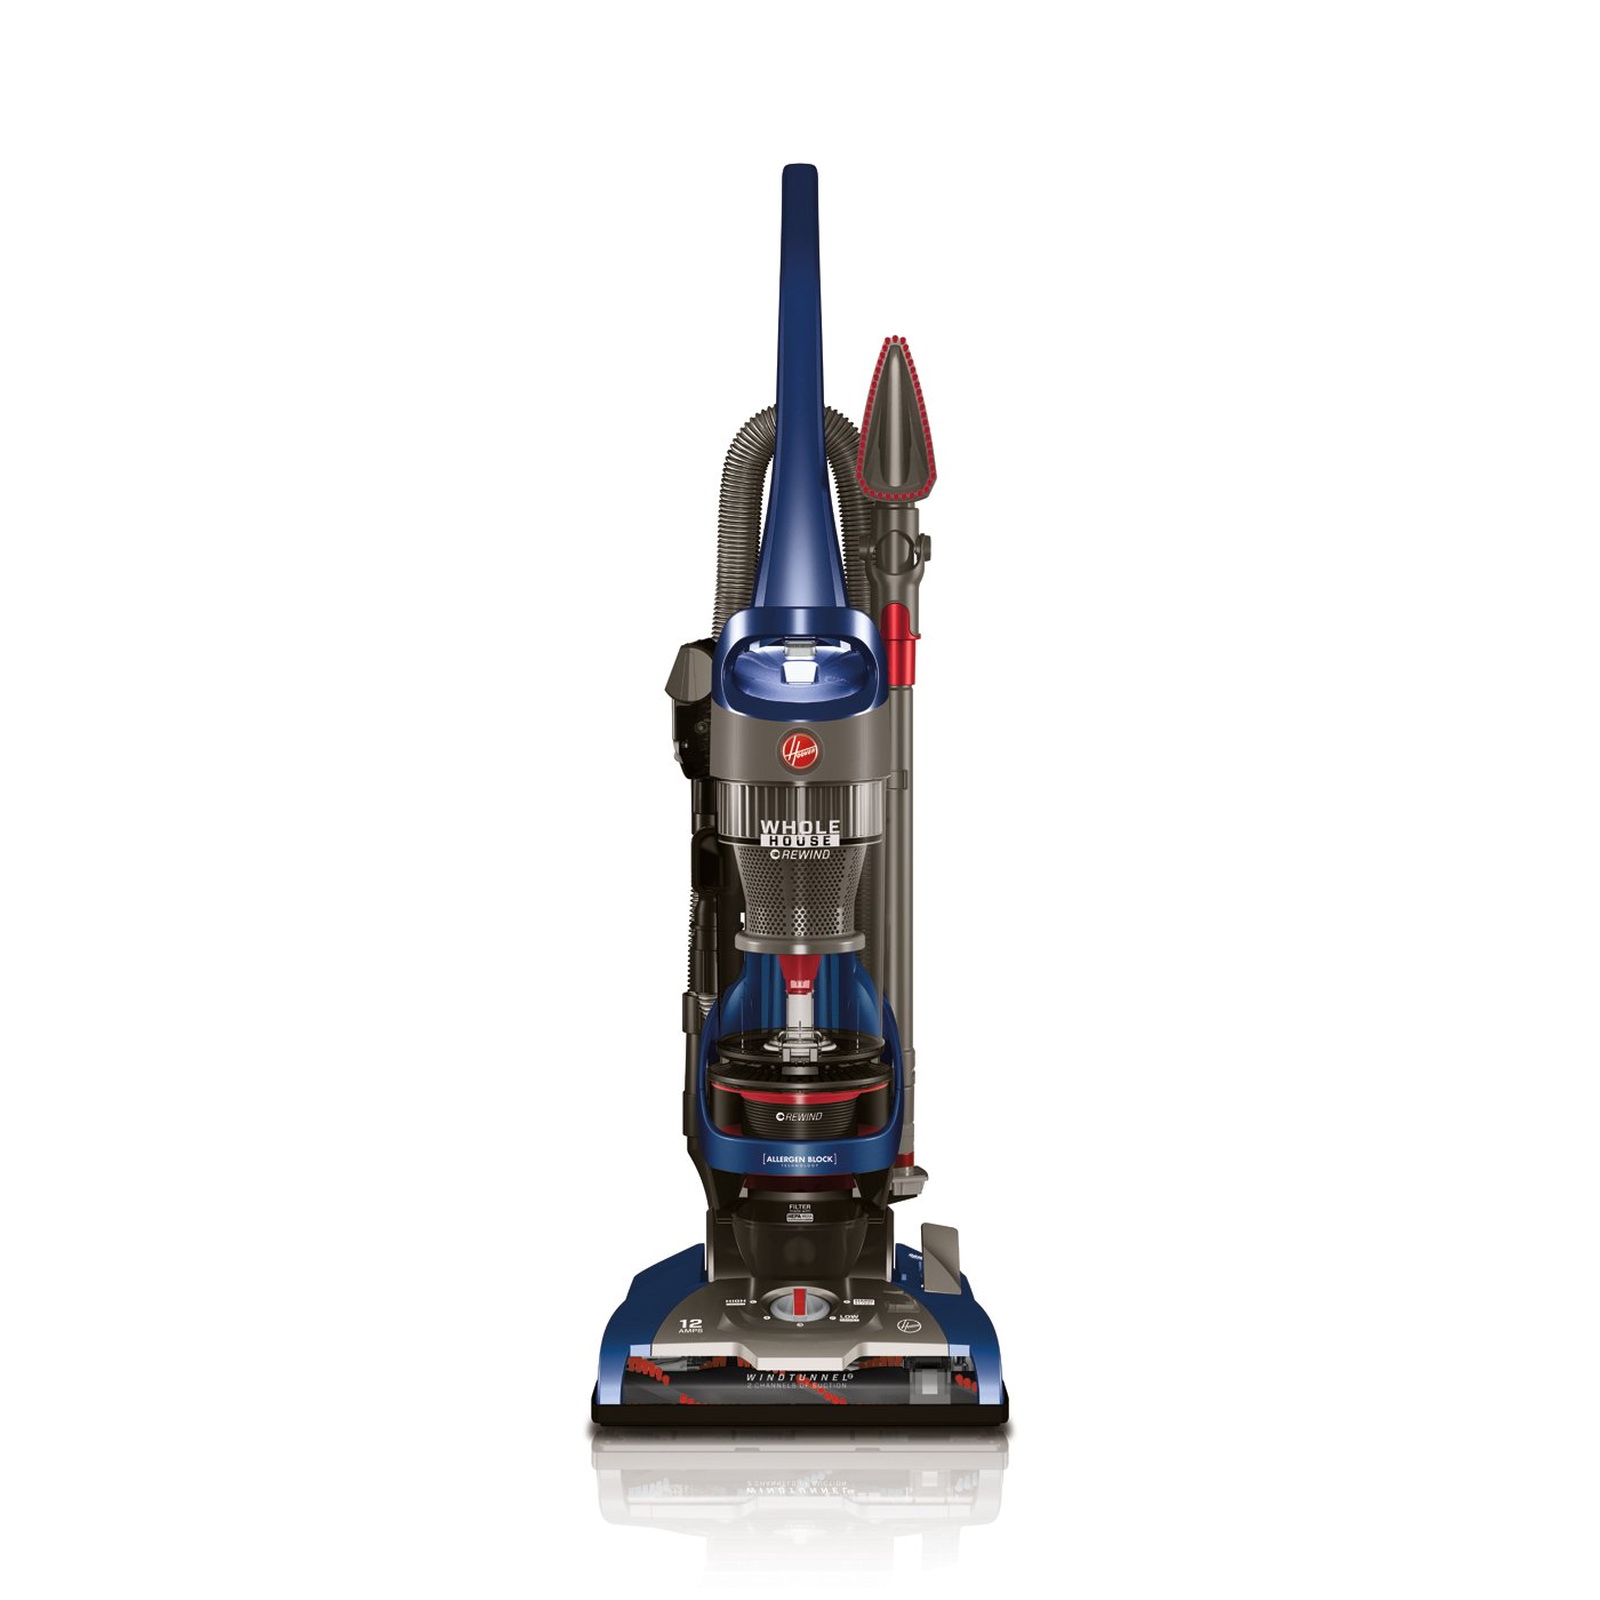 UH71250 Upright Vacuum Cleaner, HEPA Filter, 25 ft L Cord, Blue